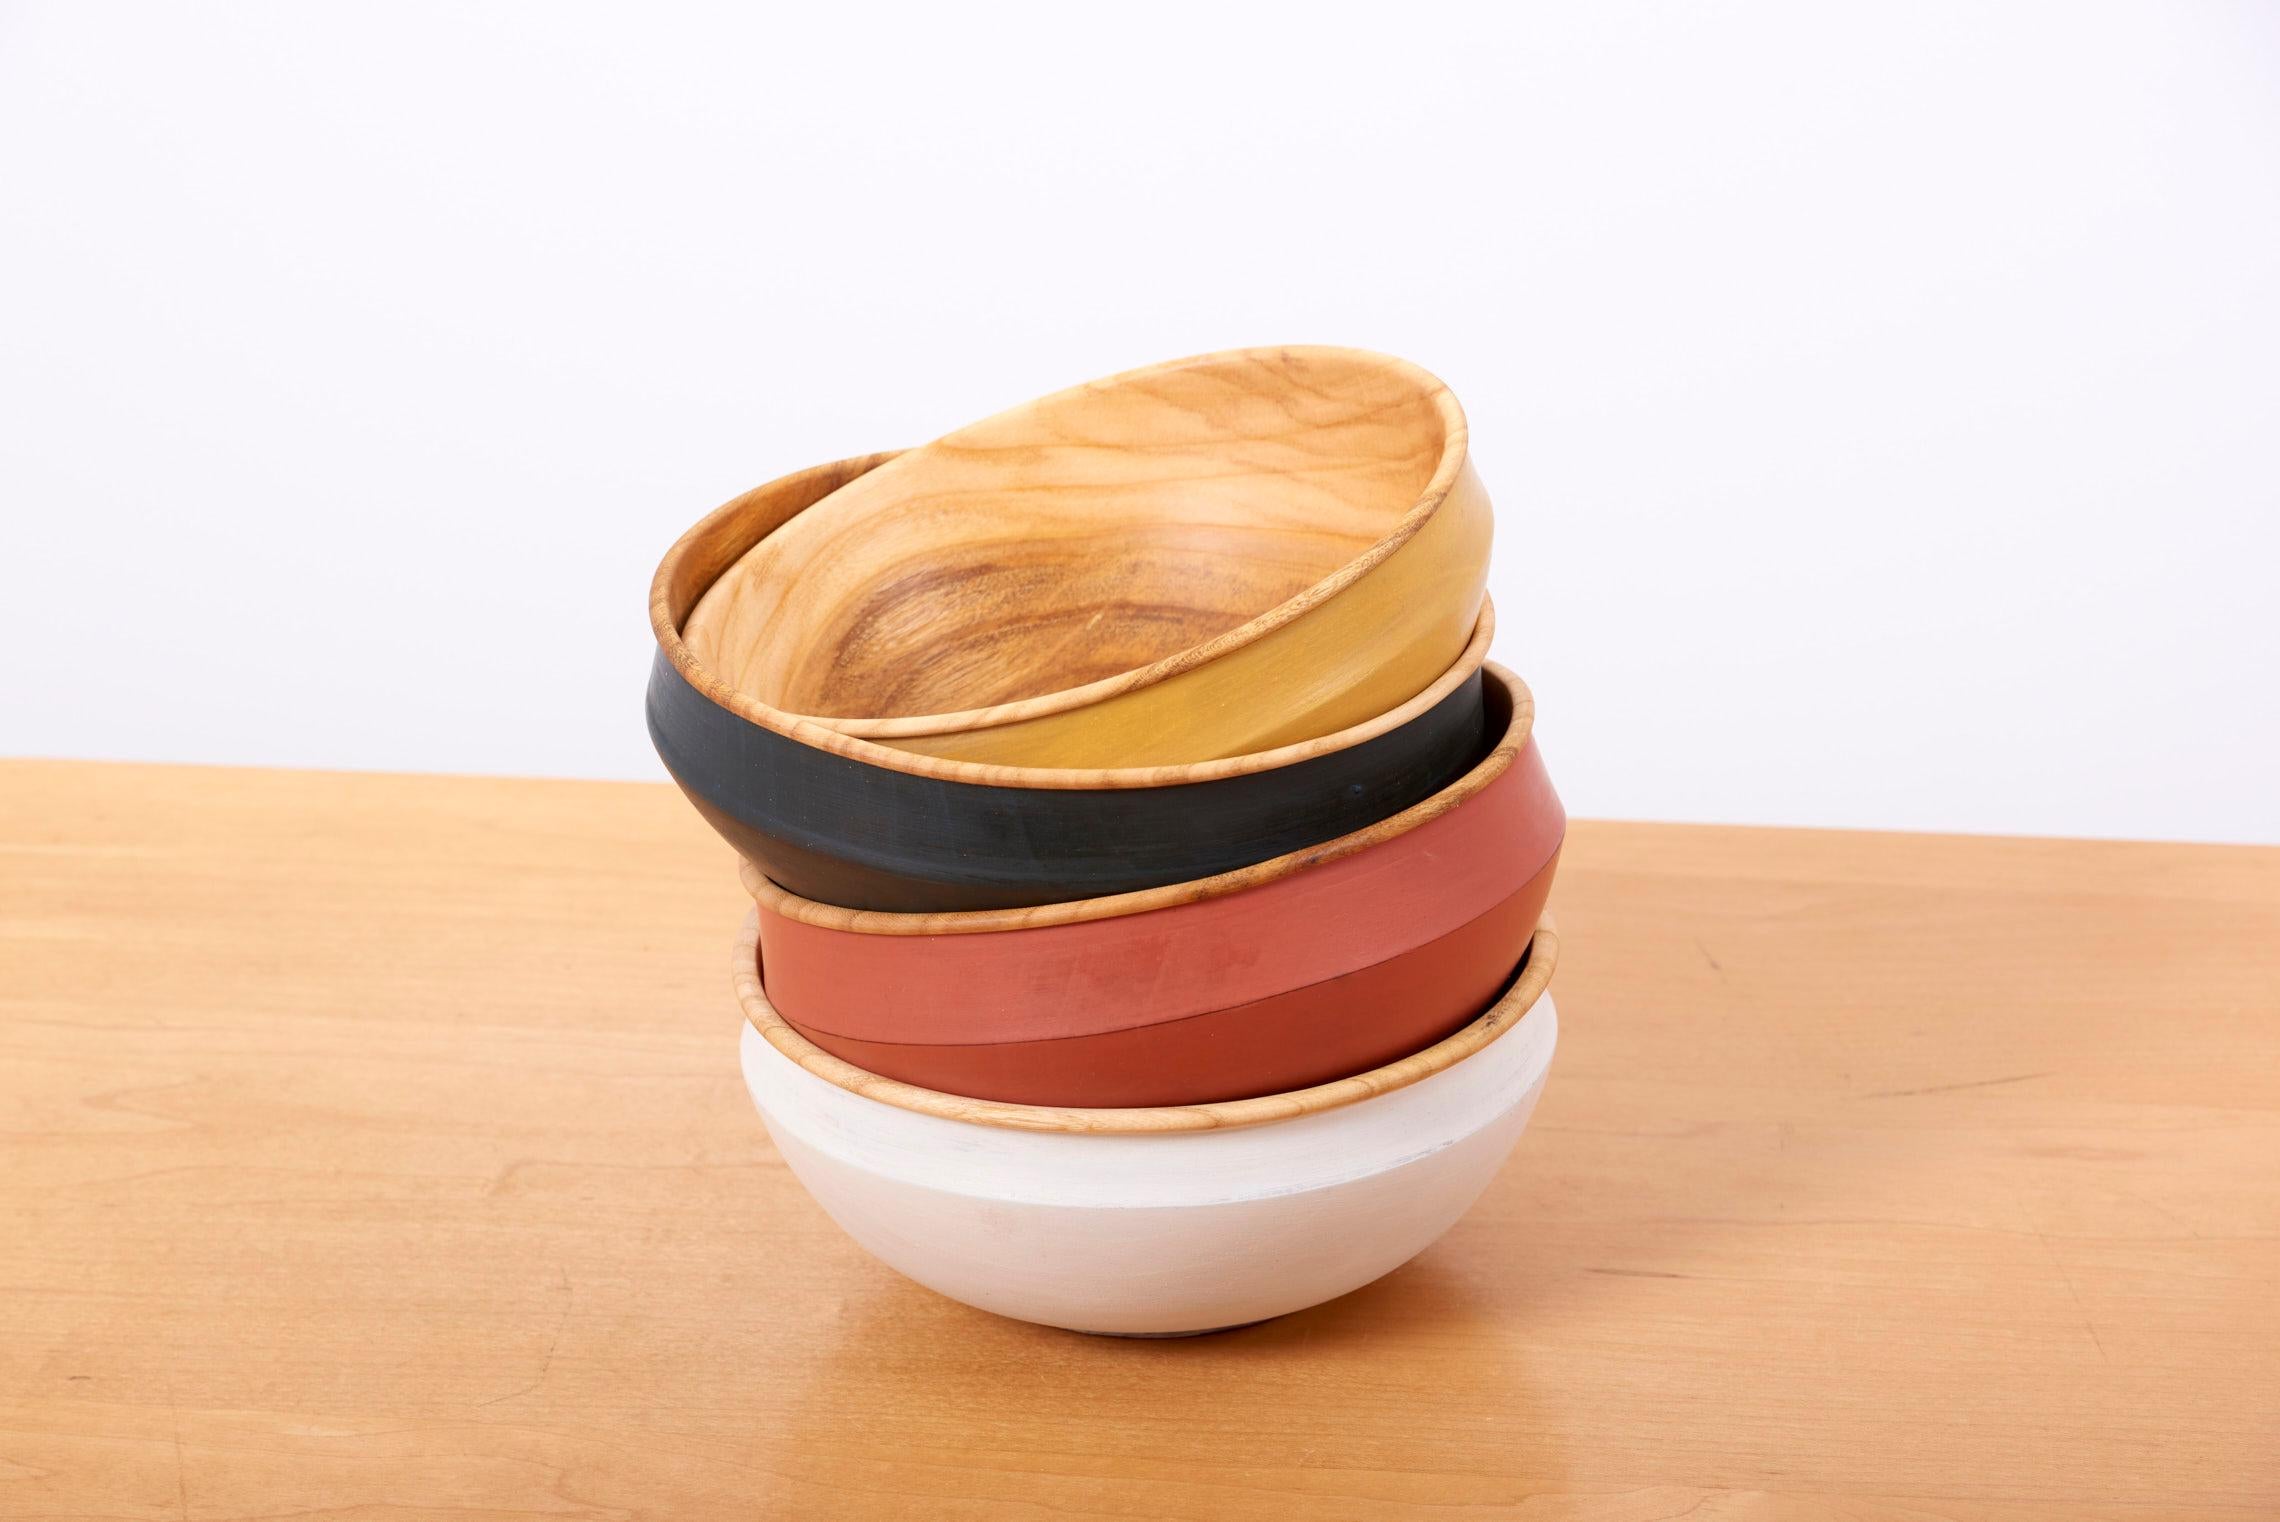 Set of 4 different colored handcrafted wooden bowls by Fabian Fischer, Germany, 2020. Made of beechwood with milk paint outside.